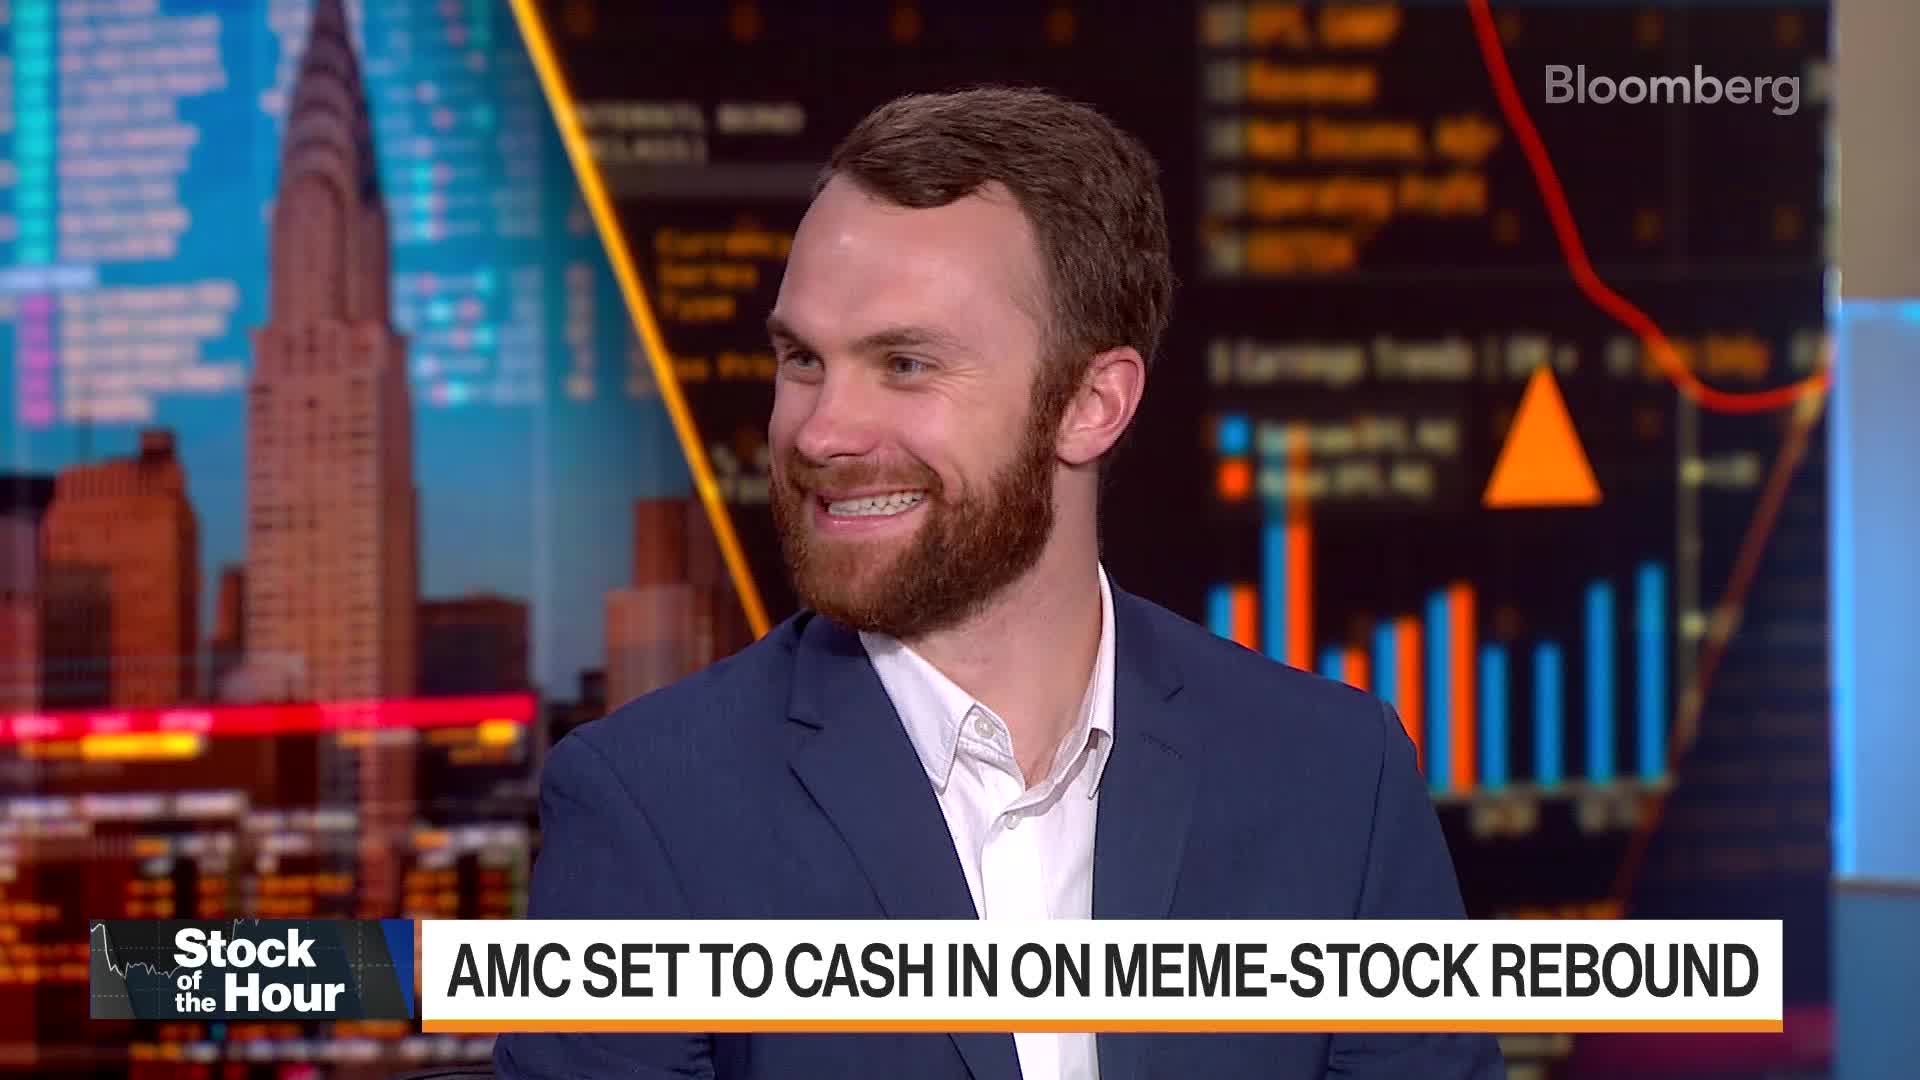 With the return of “meme fever,” attention is once again drawn to AMC and GameStop